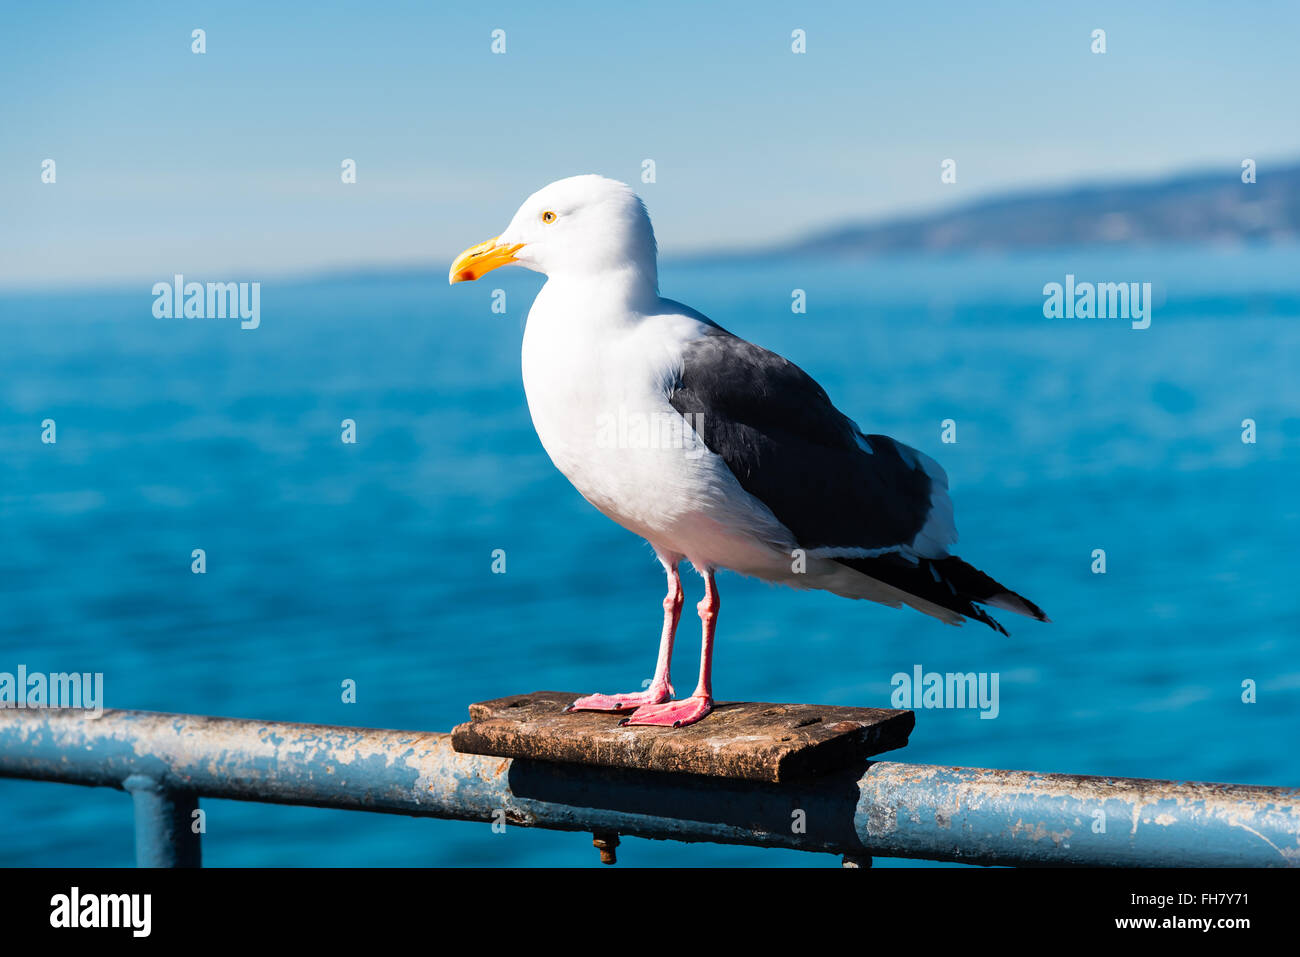 seagull sitting on a rail overlooking the ocean Stock Photo